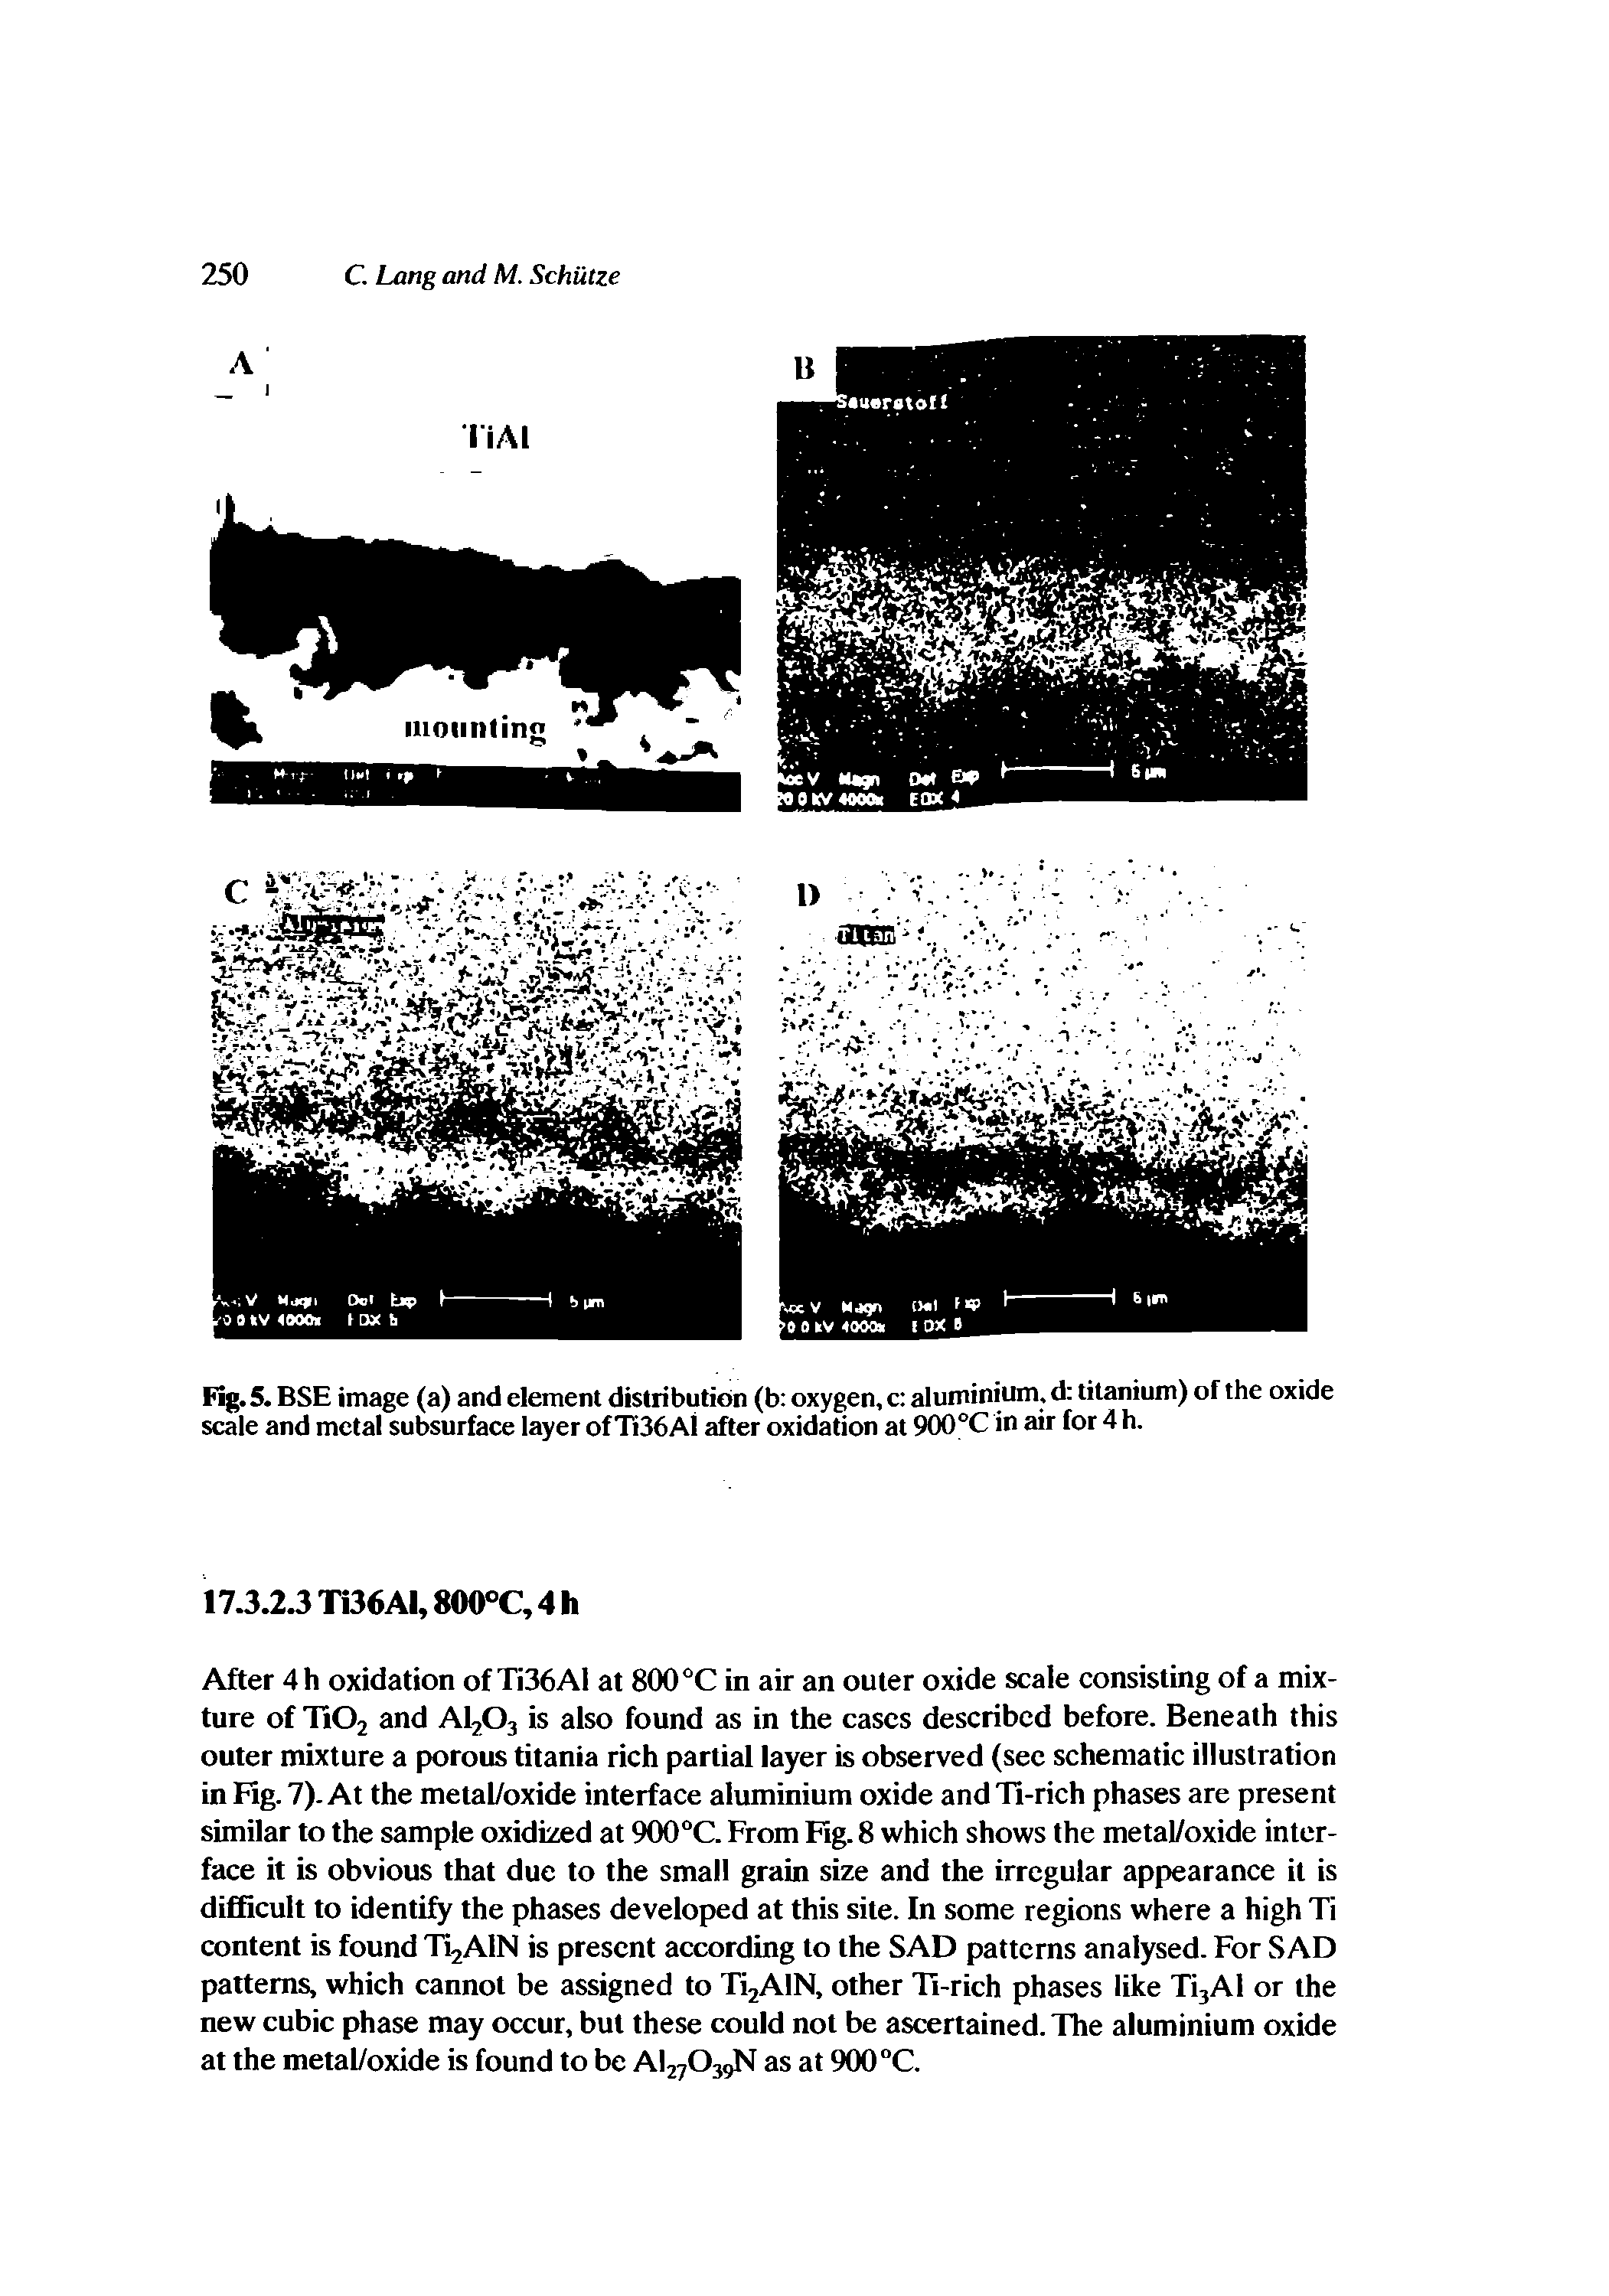 Fig. 5. BSE image (a) and element distribution (b oxygen, c aluminium, d titanium) of the oxide scale and metal subsurface layer of Ti36Al after oxidation at 900°C in air for 4 h.